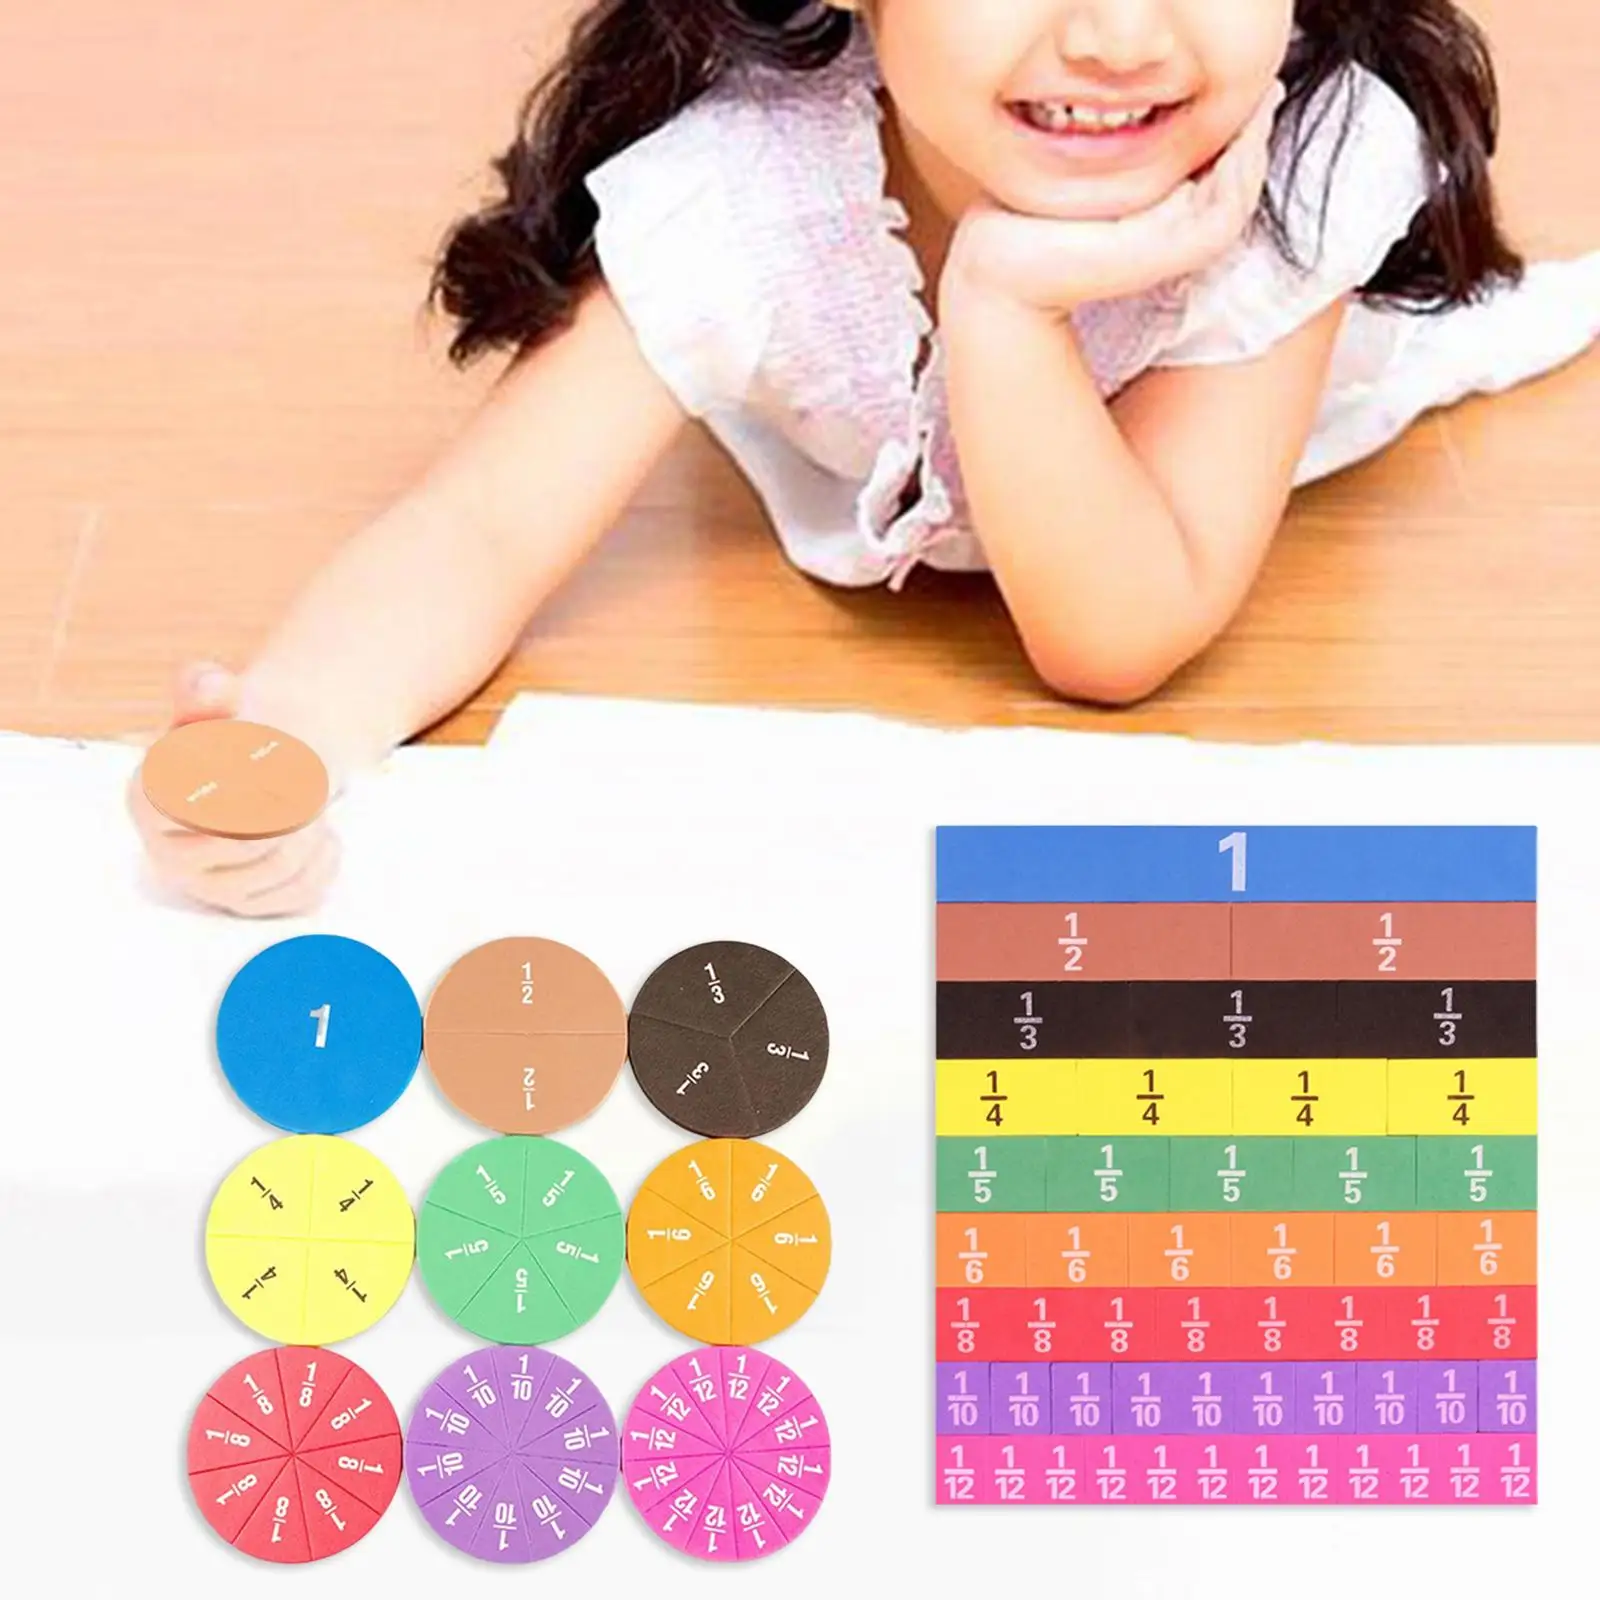 Fraction Strips and Circles Math Materials Counting Toy Manipulatives for Kids Children